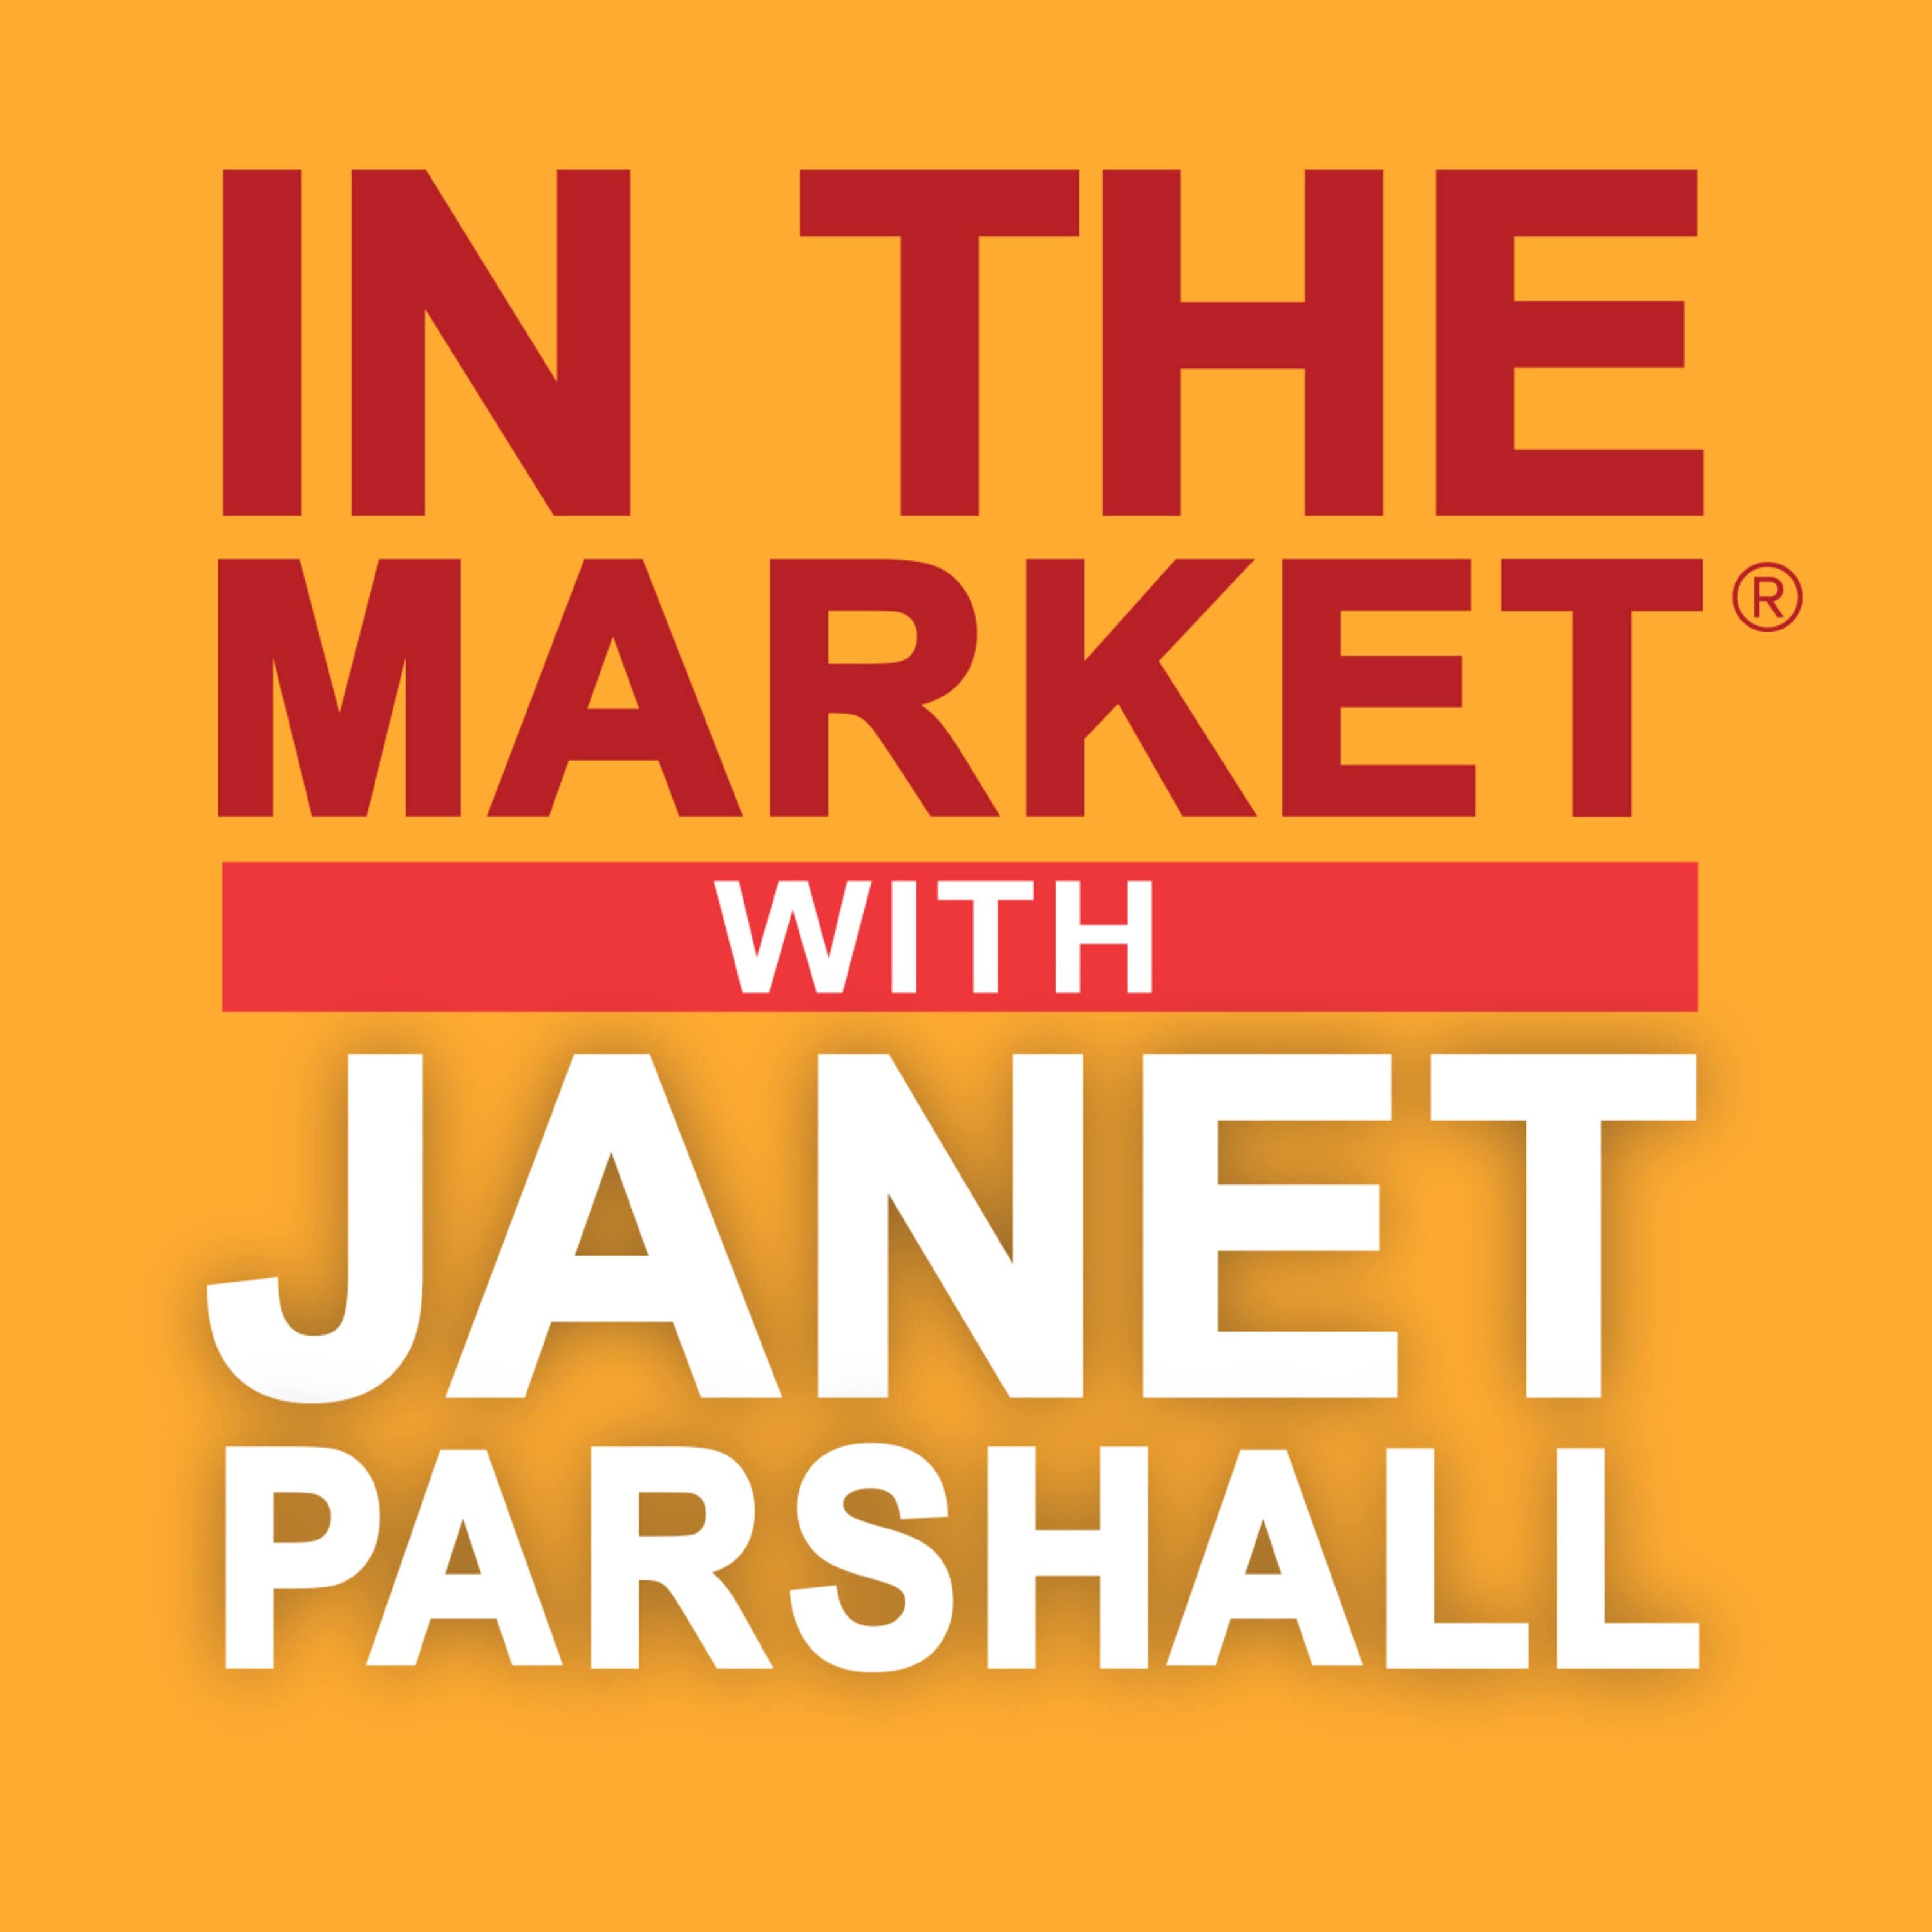 Click here to listen to Michael Heil's Interview on In The Market by Janet Parshall.